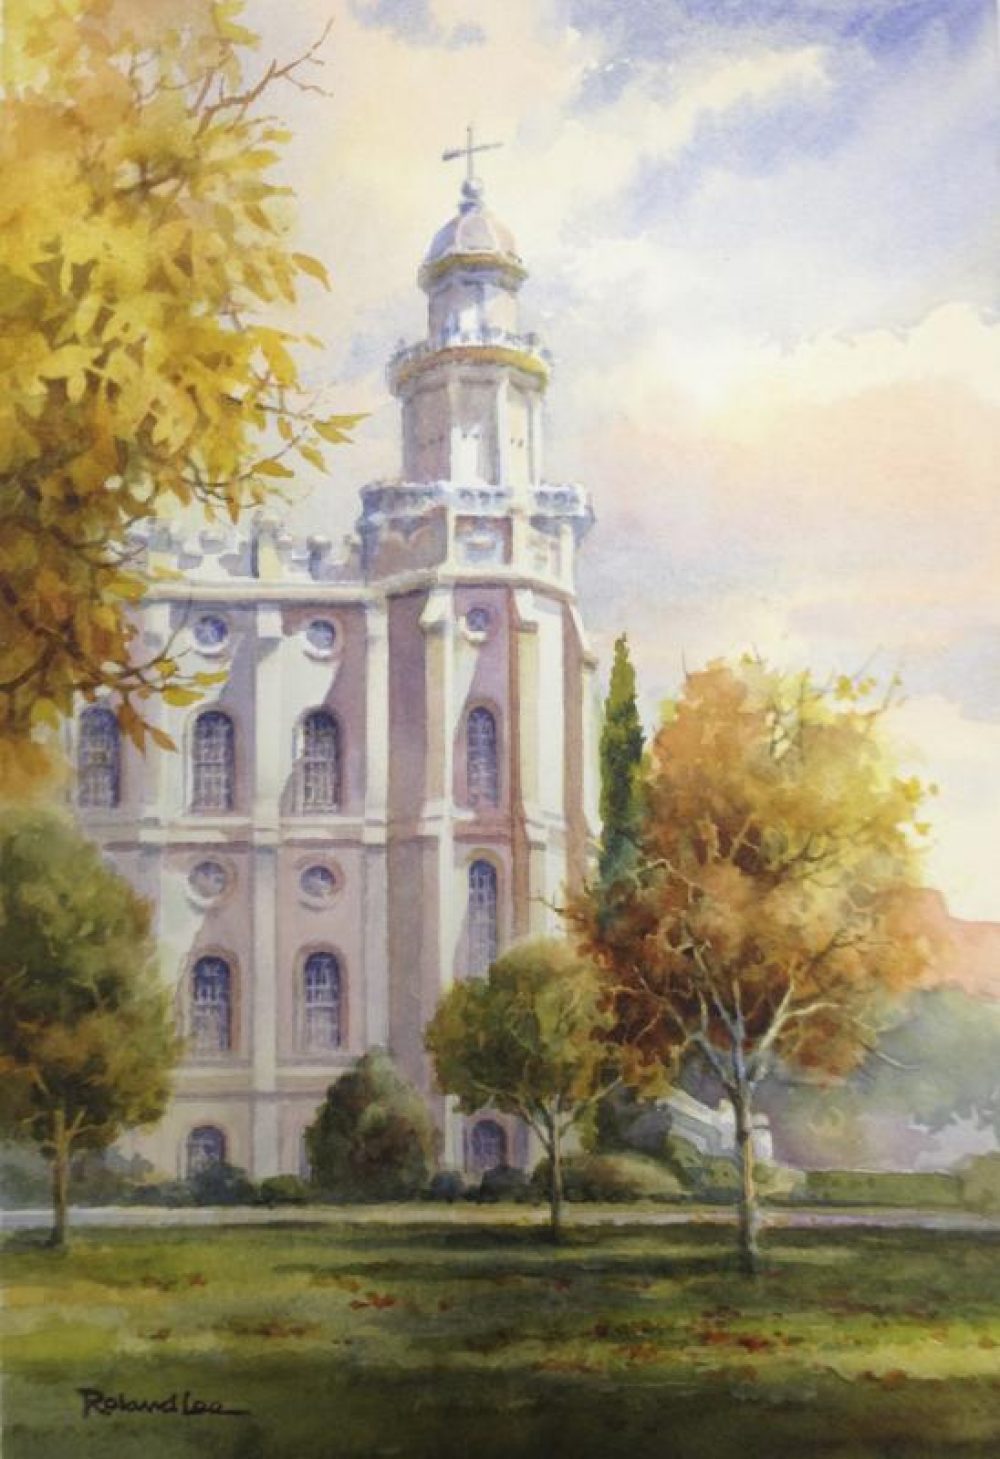 This Holy Place - Painting of the St. George LDS Temple